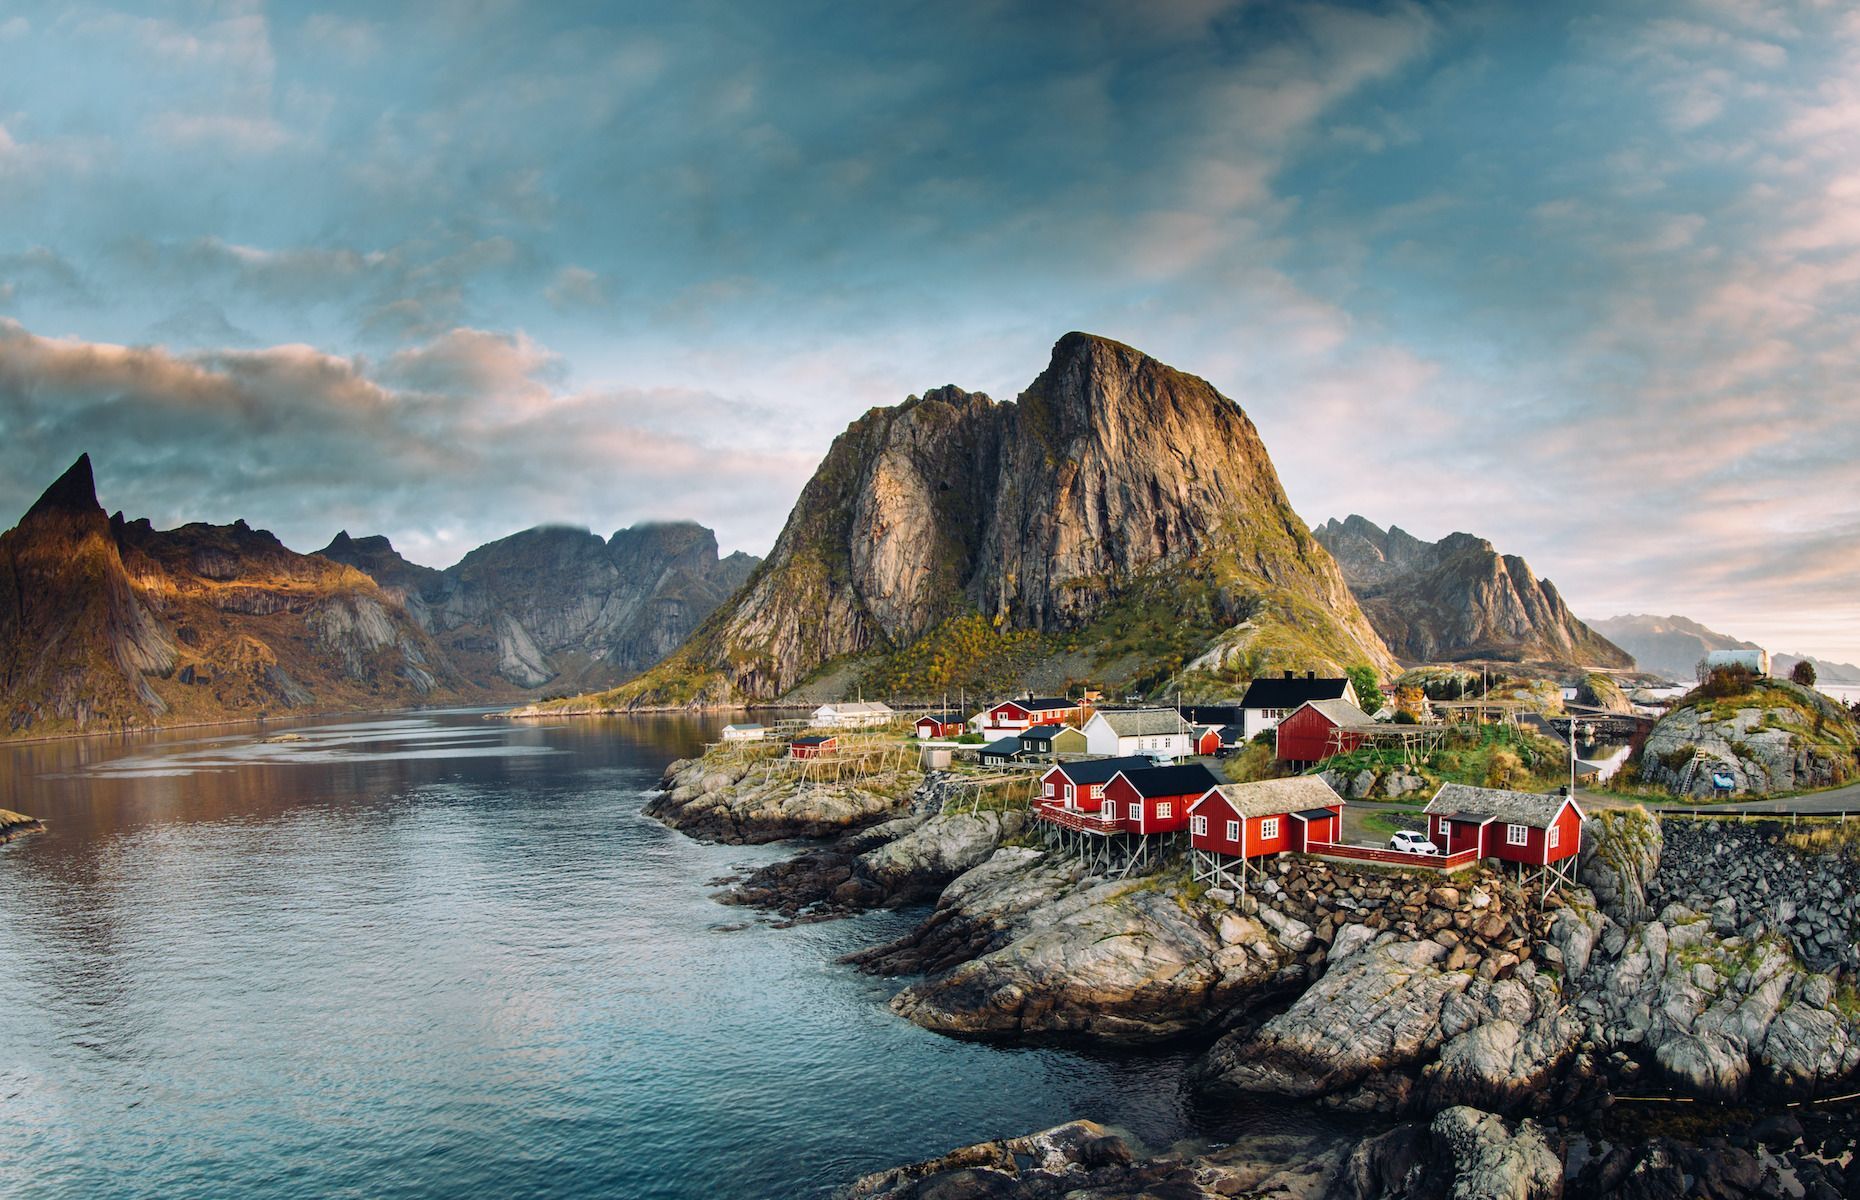 <p>Nestled off the coast of <a href="https://www.visitnorway.com/places-to-go/northern-norway/the-lofoten-islands/" class="CMY_Link CMY_Valid" rel="noreferrer noopener">Norway</a>, the <a href="https://www.lofotenlights.com/lofoten-islands/" class="CMY_Link CMY_Valid" rel="noreferrer noopener">Lofoten Islands</a> offer a unique arctic experience with stunning scenery. Trip highlights include hikes along coastal paths to admire fjords and rugged mountains followed by sea fishing for the famous Arctic cod. Featuring colourful houses and illuminated harbours, Reine, Hamnøy, and other fishing villages offer a glimpse into traditional Norwegian life. The Lofoten Islands also offer renowned views of the northern lights in winter and midnight sun in summer, a truly unforgettable natural experience.</p>